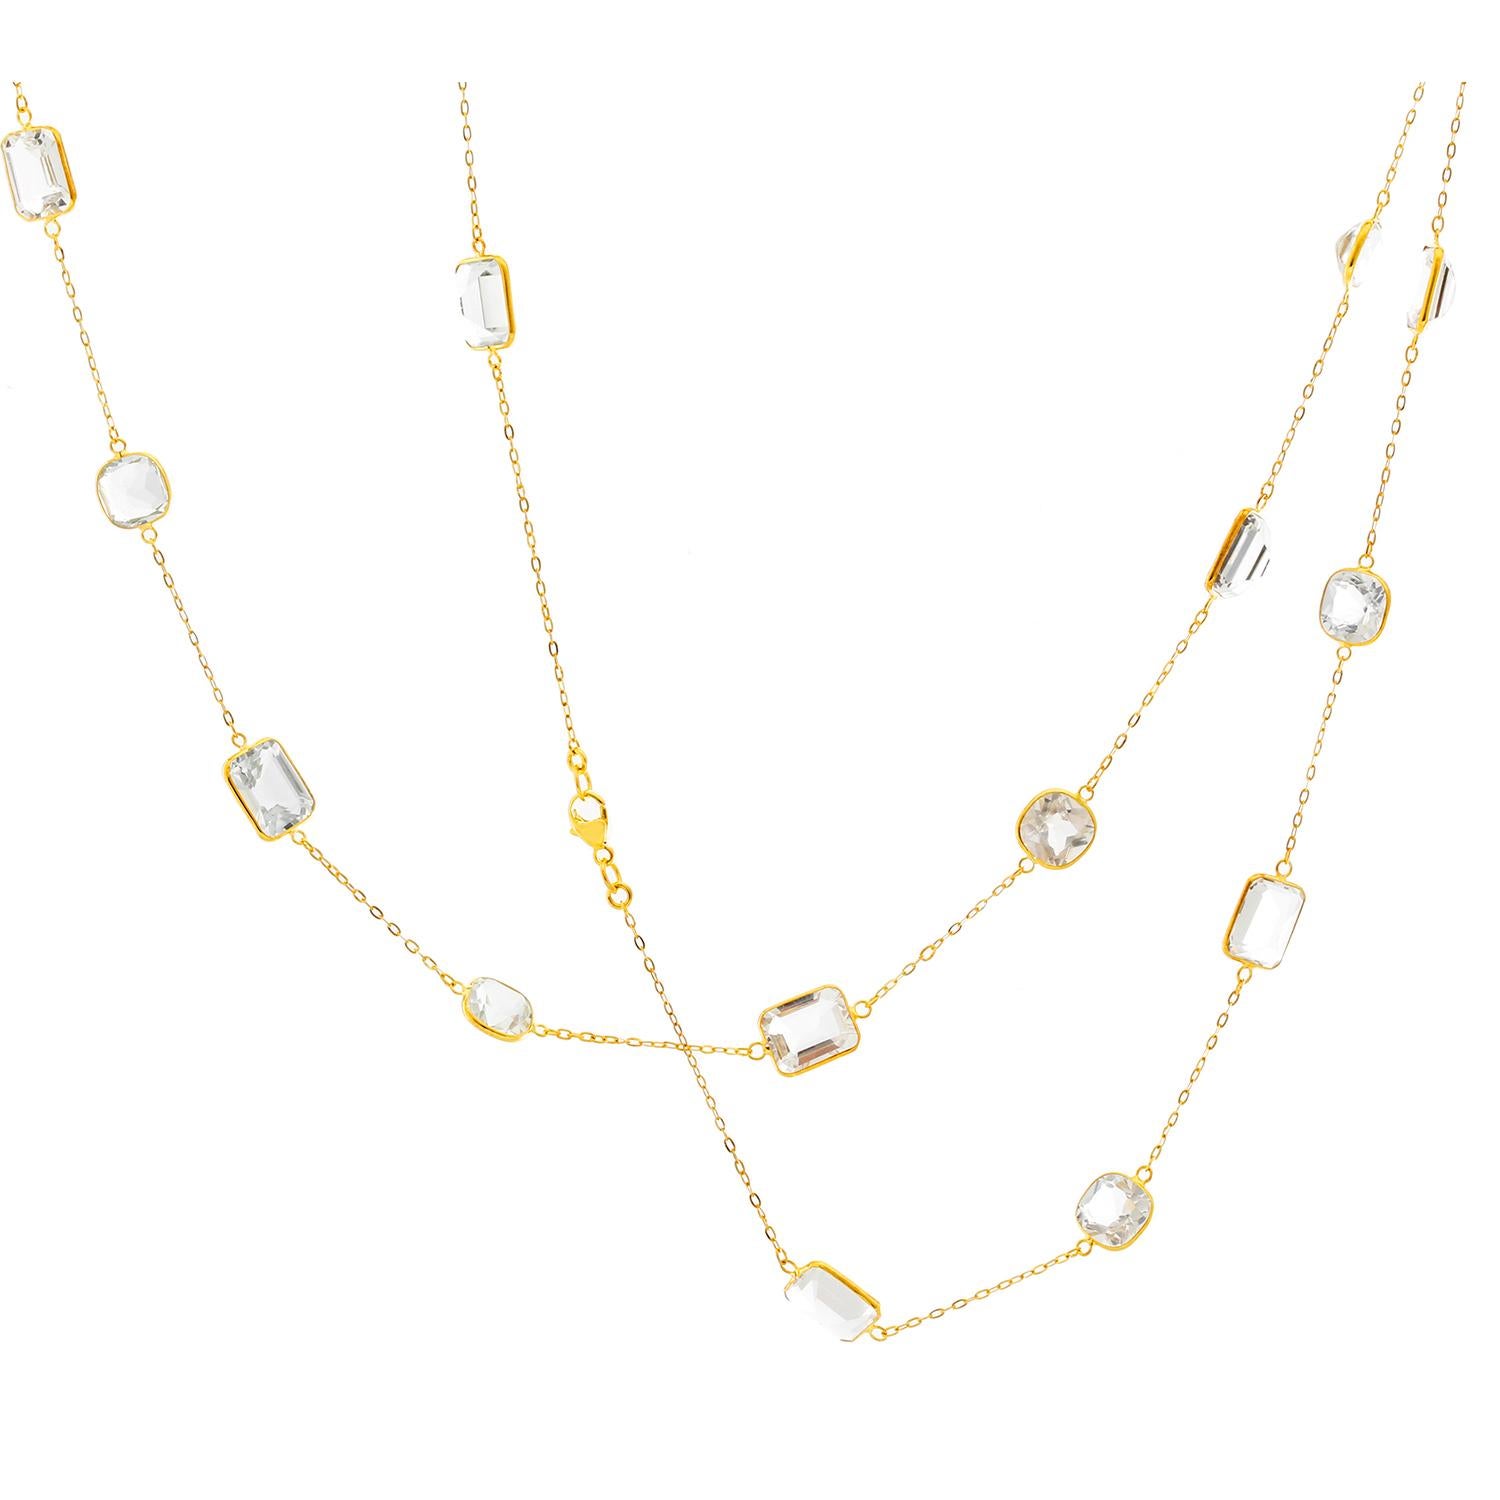 14K Yellow Gold Necklace By The Yard With White Topaz Gemstones 18 Inches 